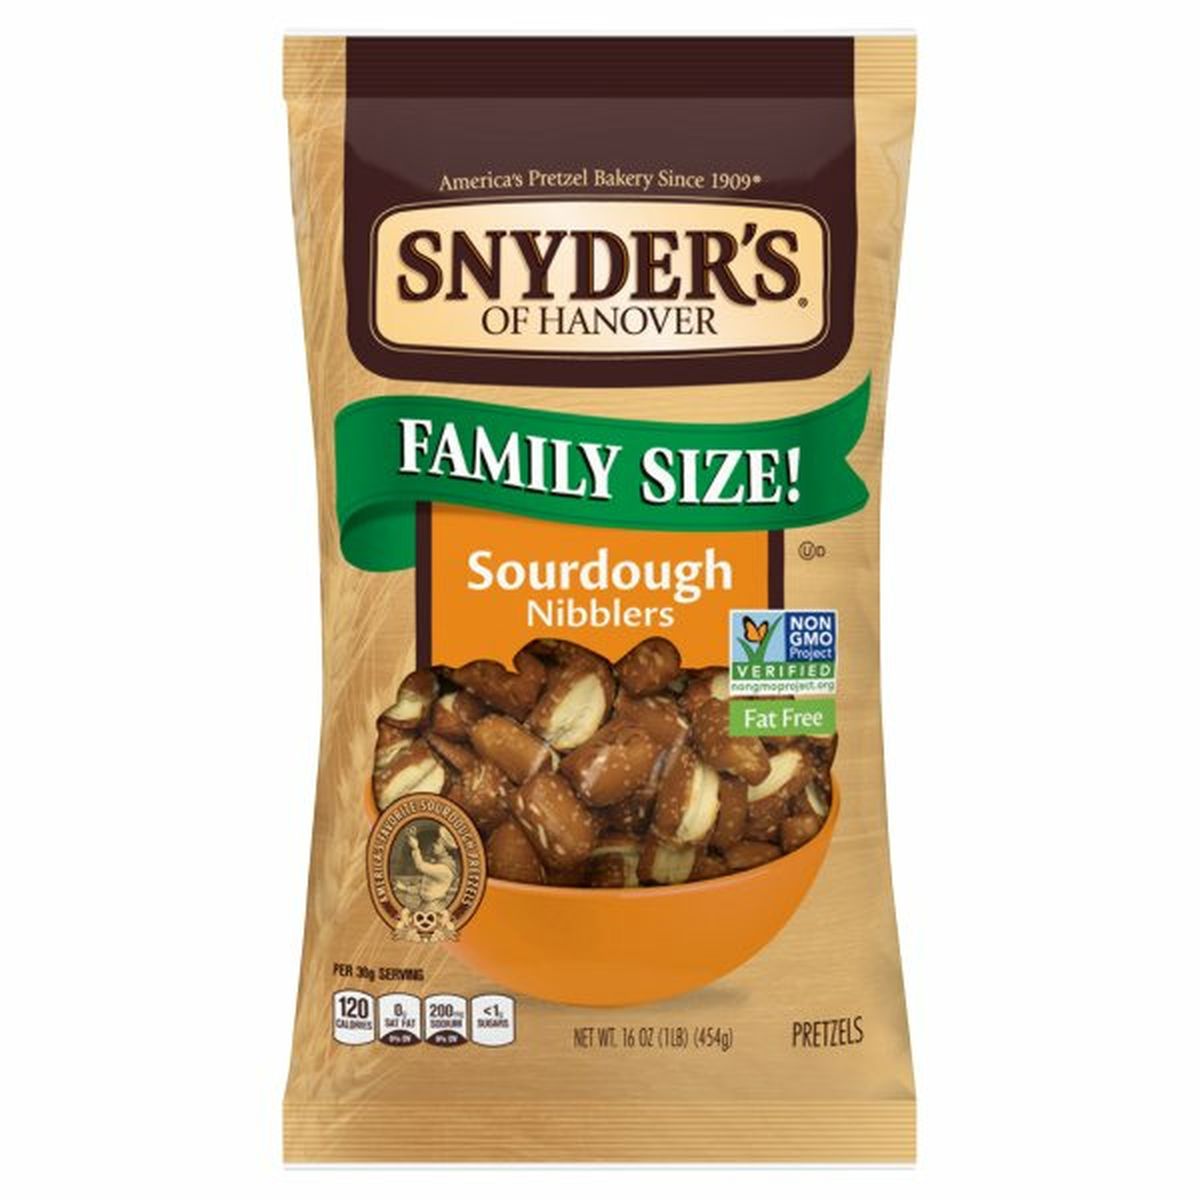 Calories in Snyder's of Hanovers Pretzels, Sourdough Nibblers, Family Size